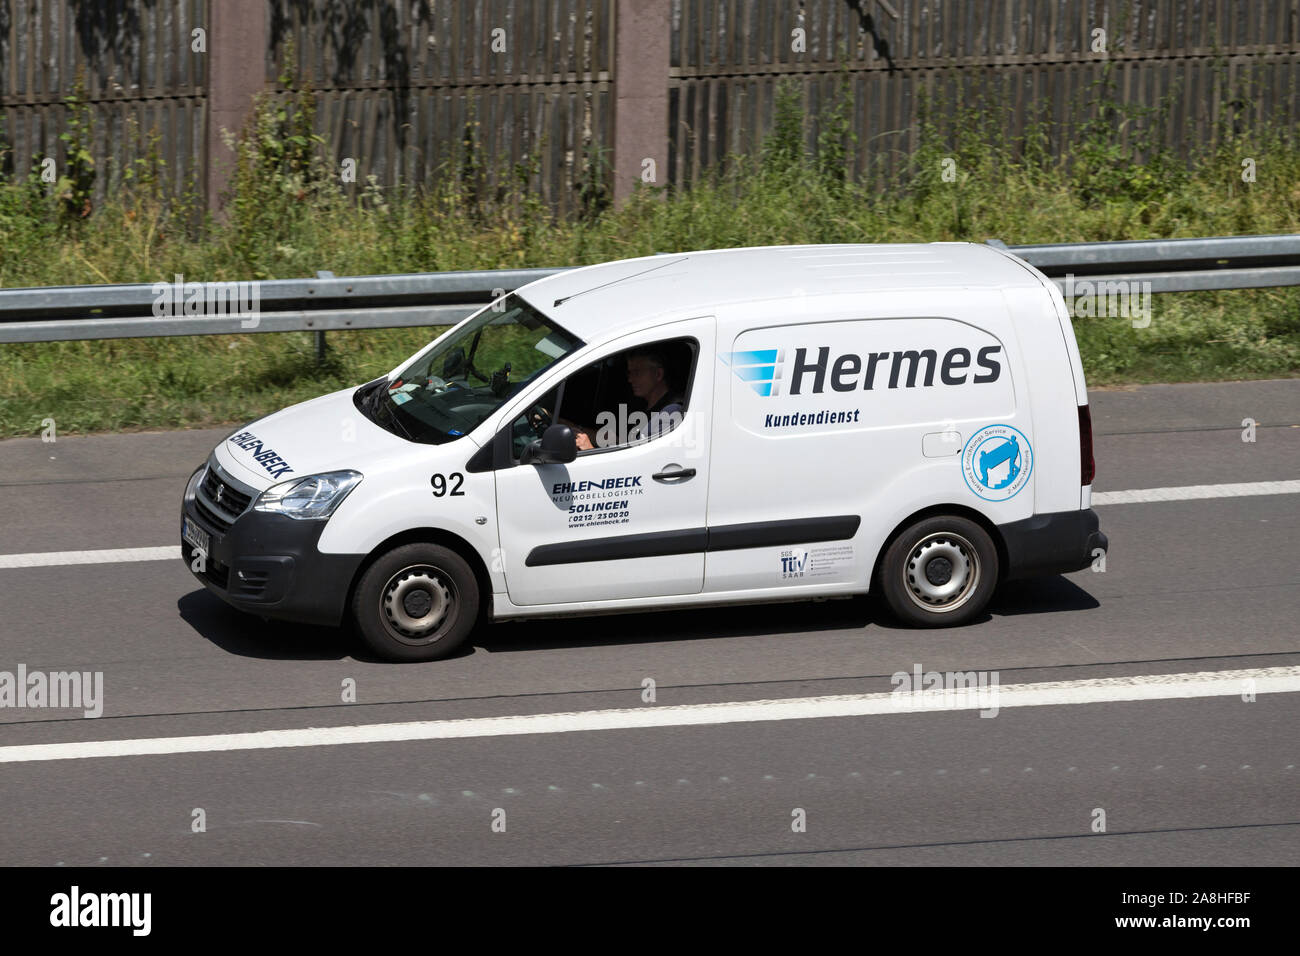 Hermes Kundendienst van on motorway. Hermes is Germany’s largest post-independent provider of deliveries to private customers. Stock Photo